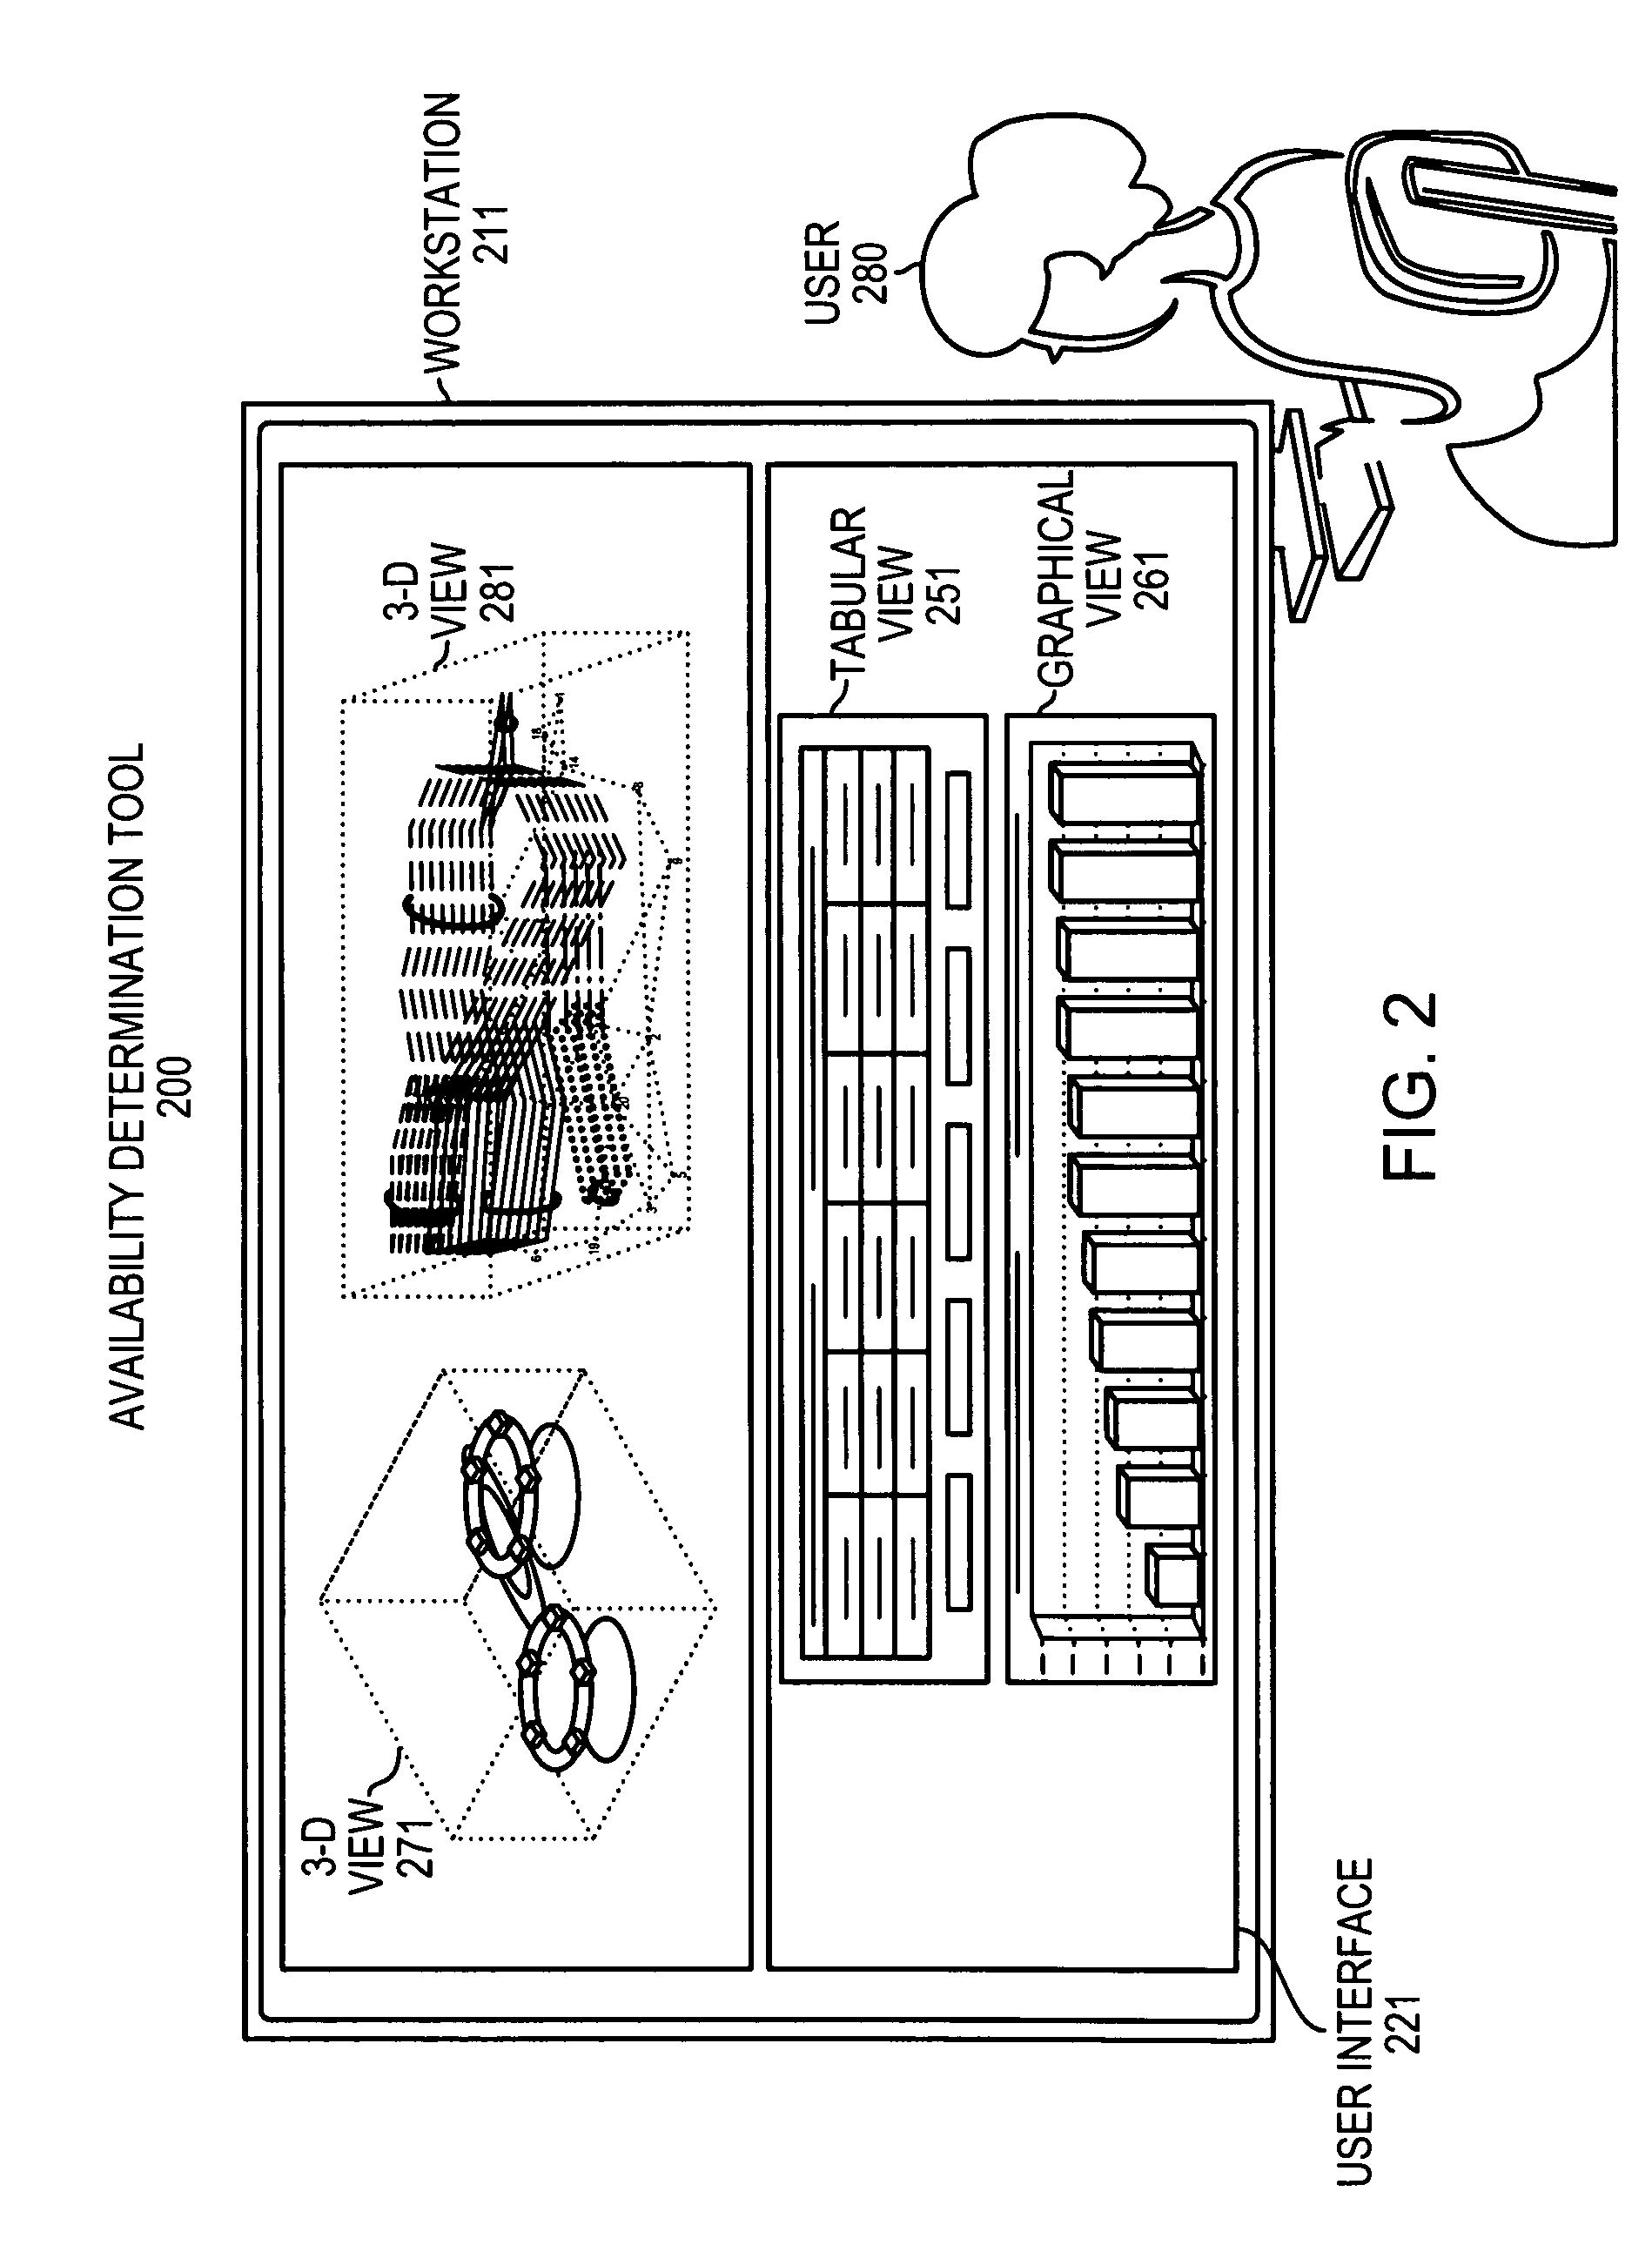 Method and apparatus for displaying and identifying available wavelength paths across a network